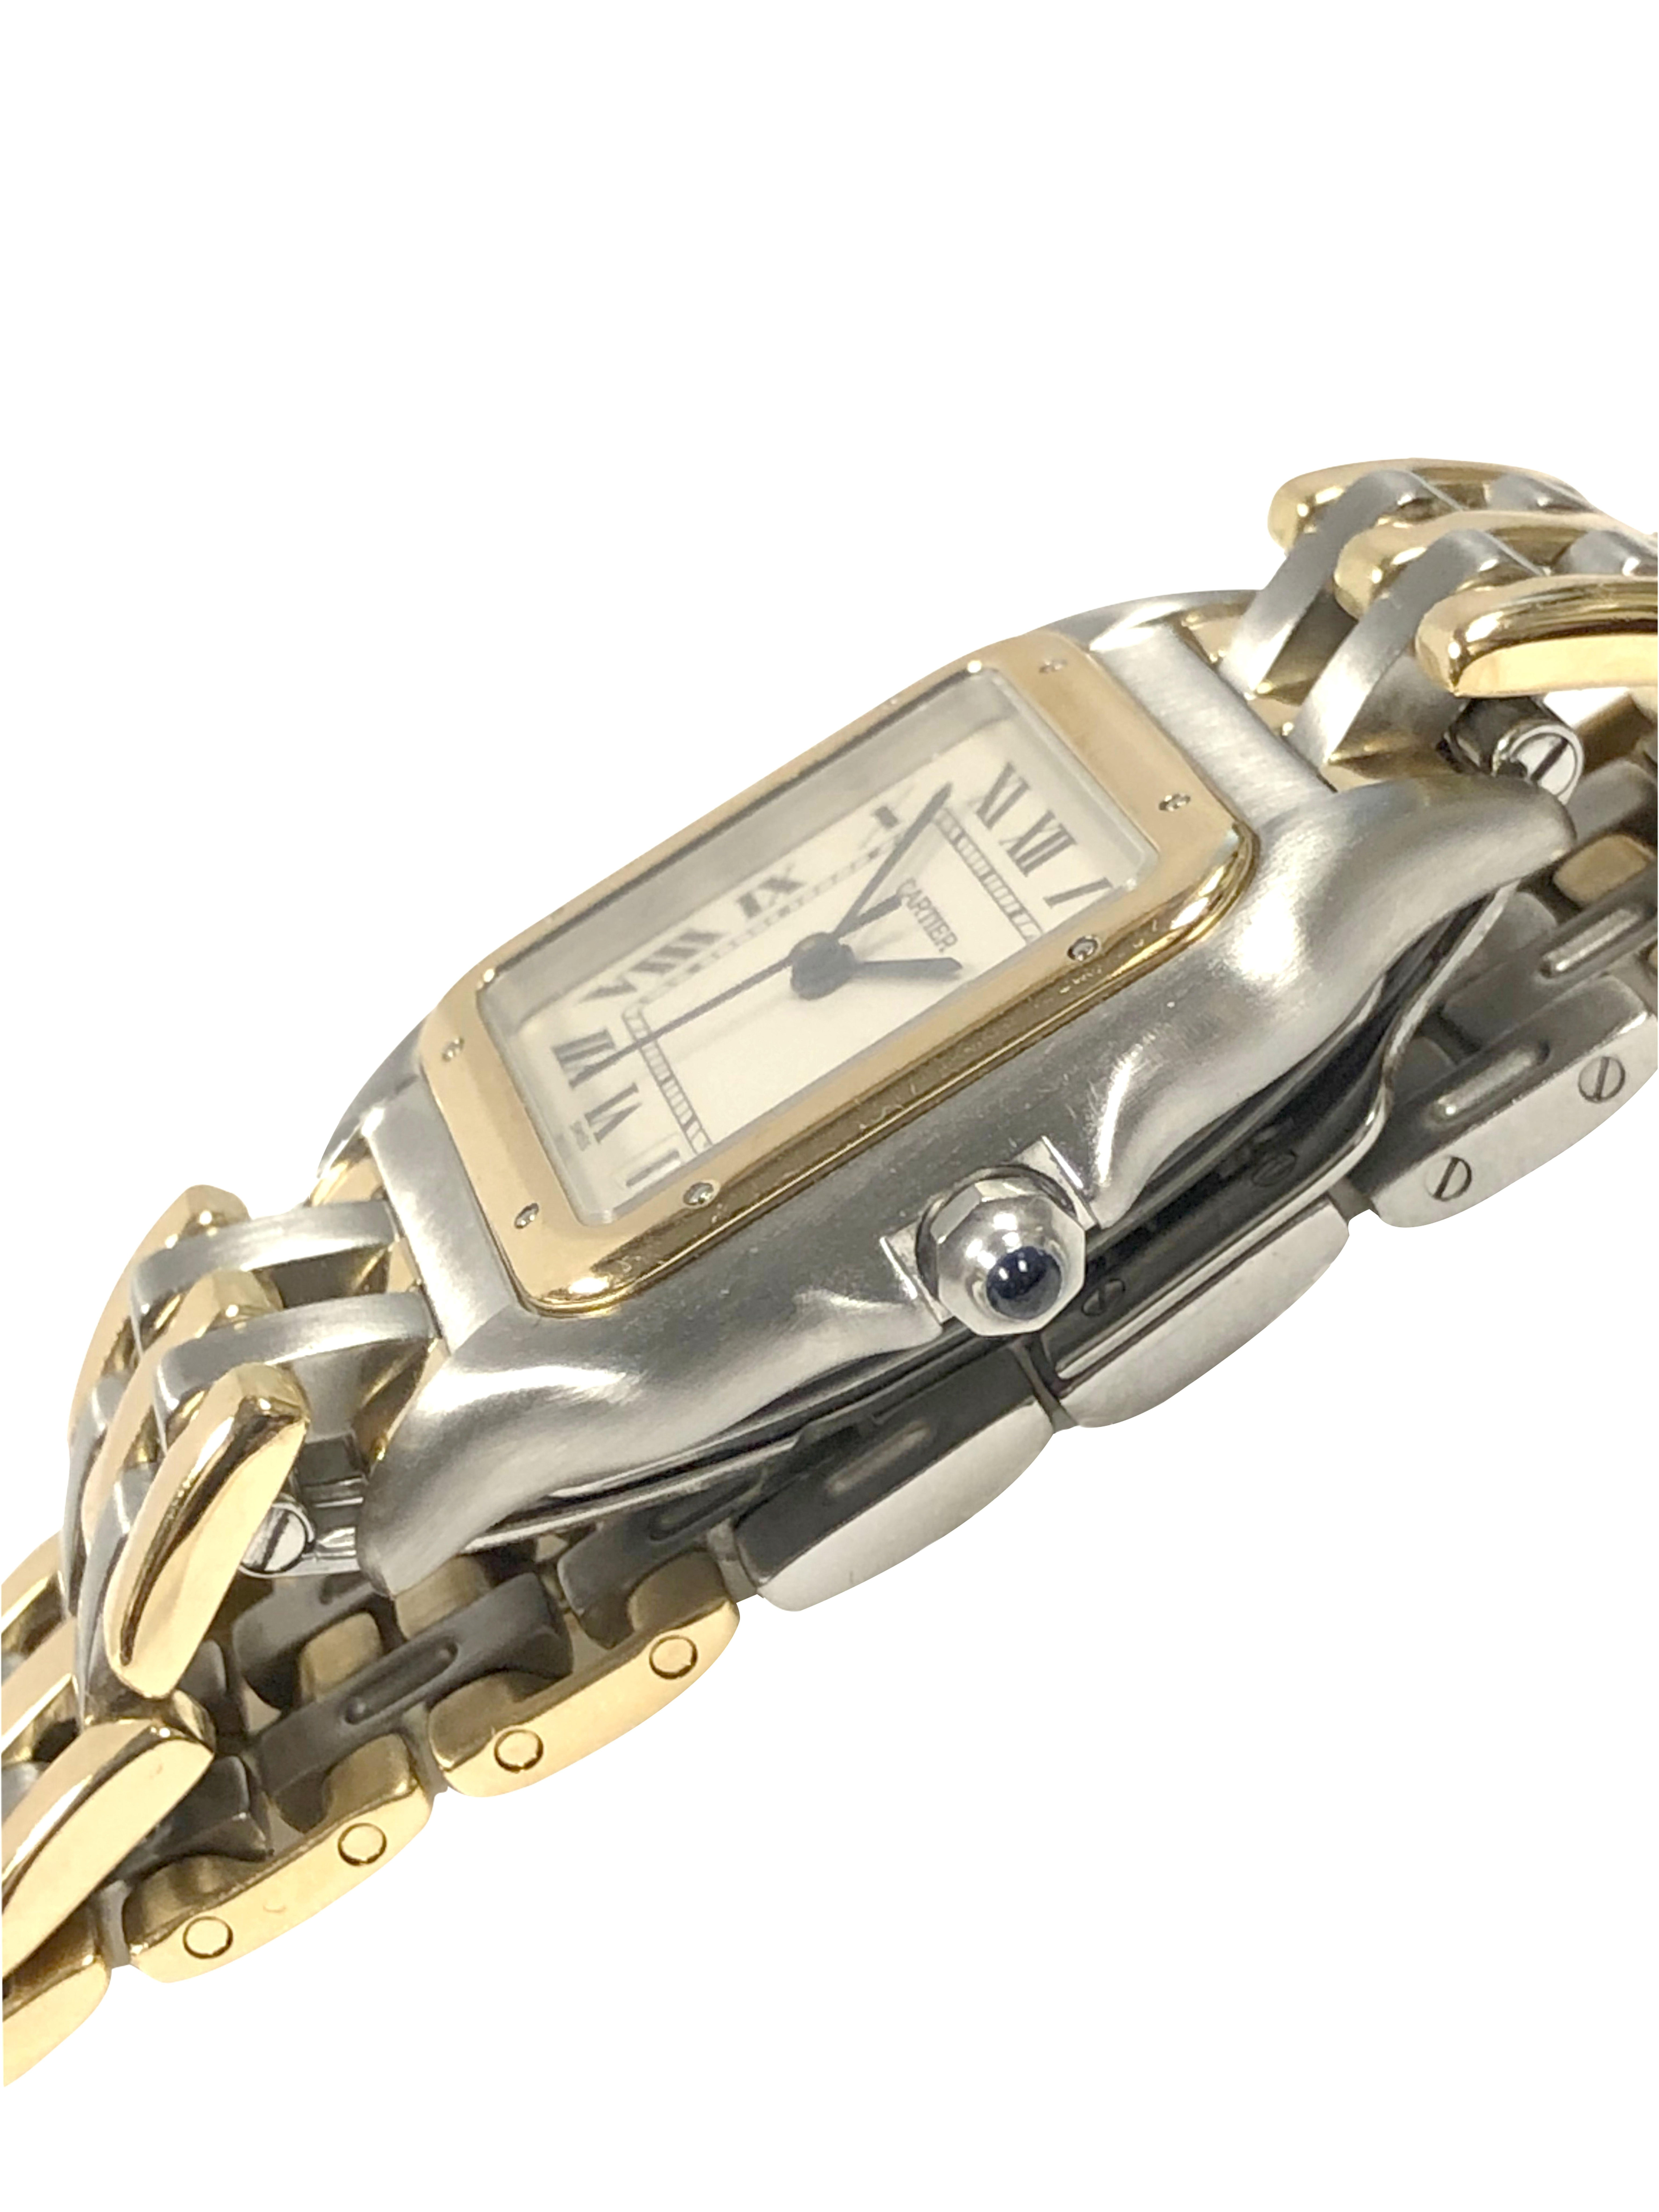 Circa 2015 Cartier Panther collection Wrist Watch, 37 X 27 M.M. 3 Piece water resistant case with 18K yellow Gold Bezel, sapphire set crown. Quartz movement, White dial with Black Roman numerals, Calendar window at the 5 position and a sweep seconds